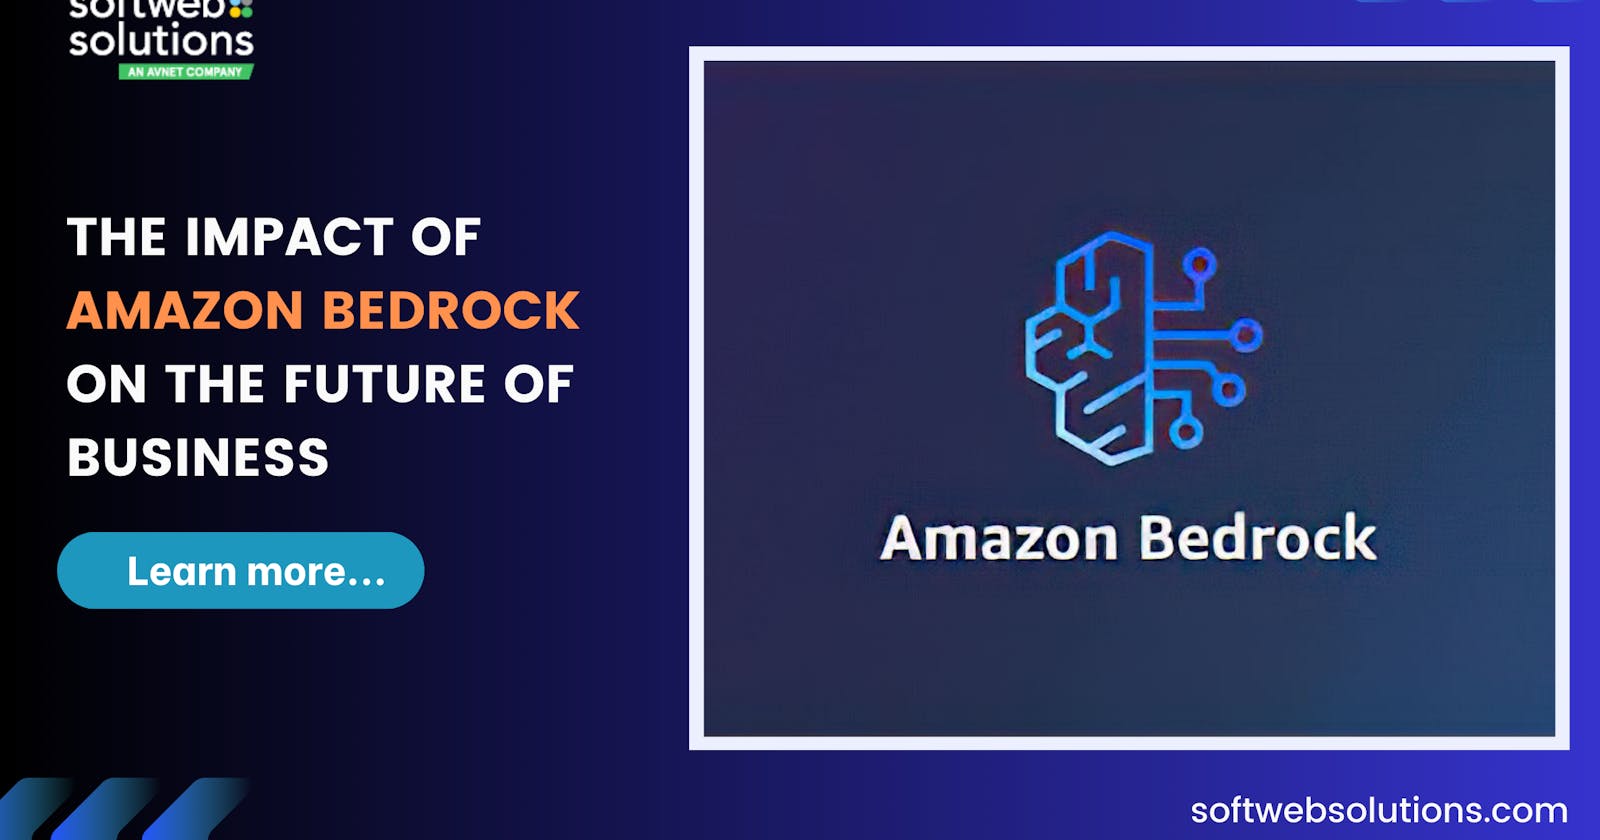 The impact of Amazon Bedrock on the future of business